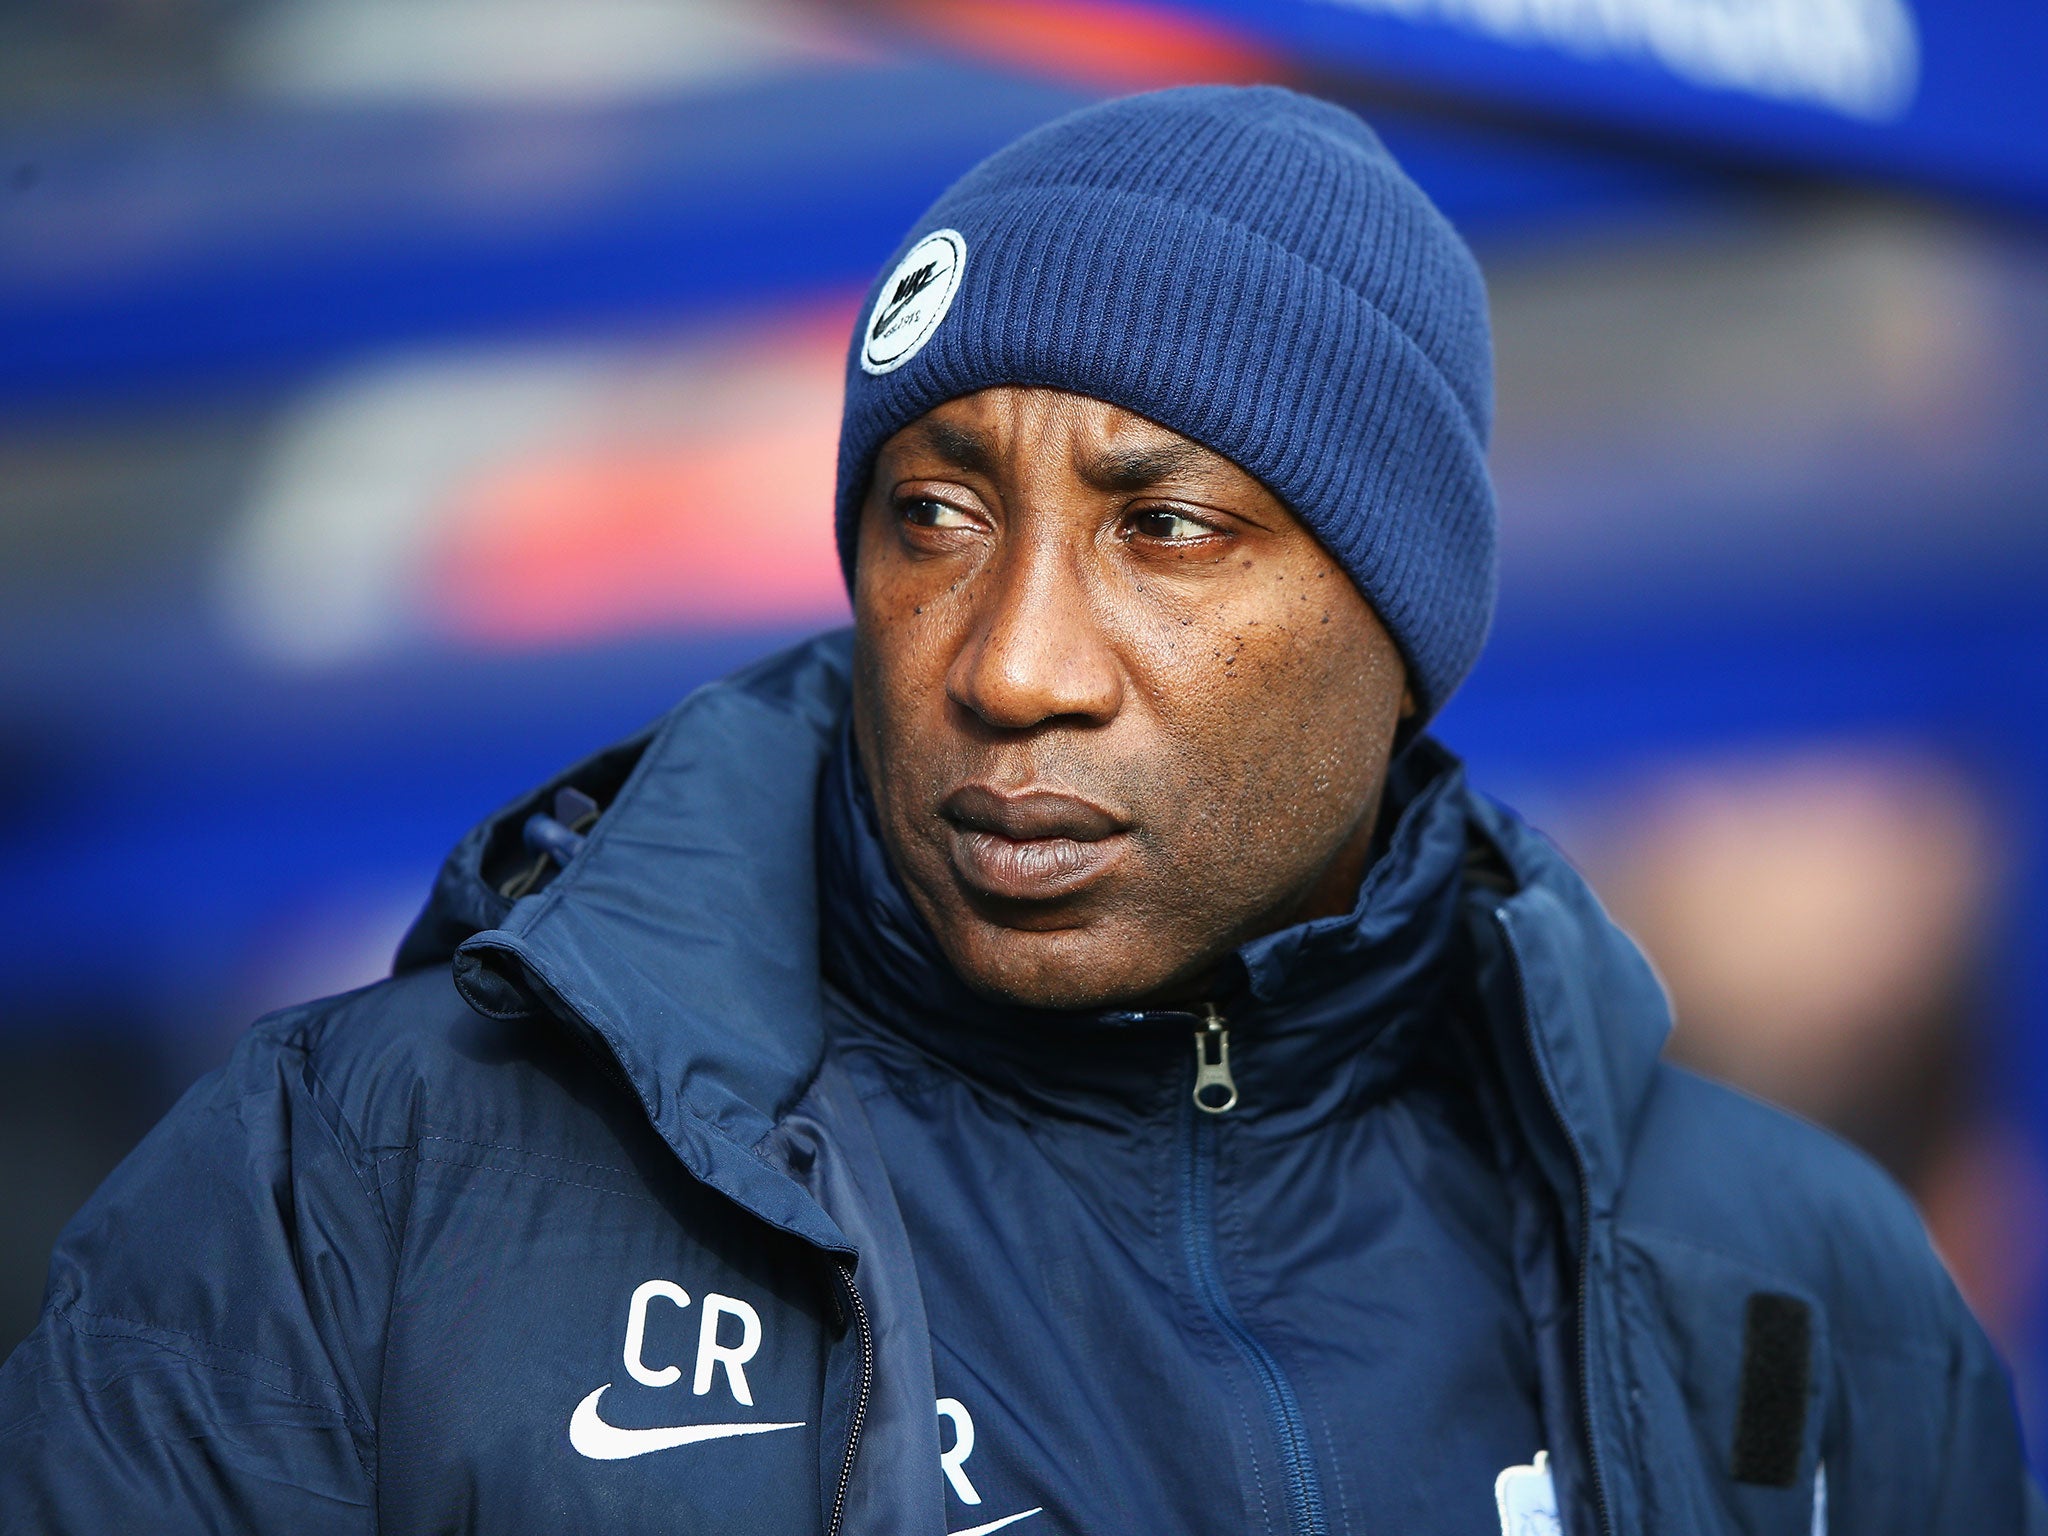 QPR manager Chris Ramsey